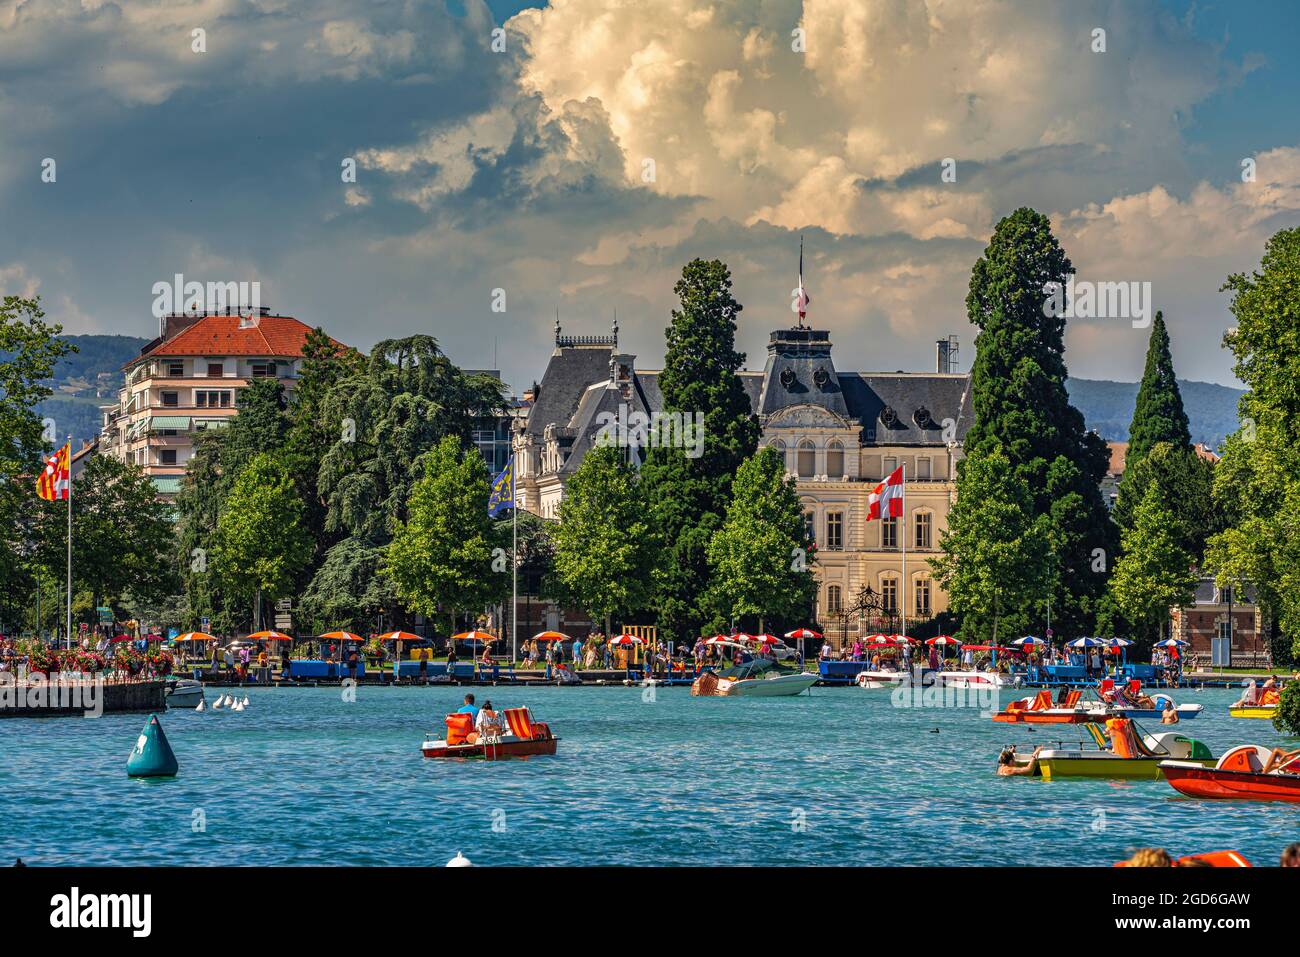 Summer fun on a summer day on Lake Annecy. Tourists on pedal boats and under umbrellas. Annecy, Savoie department, Auvergne-Rhône-Alpes region, France Stock Photo